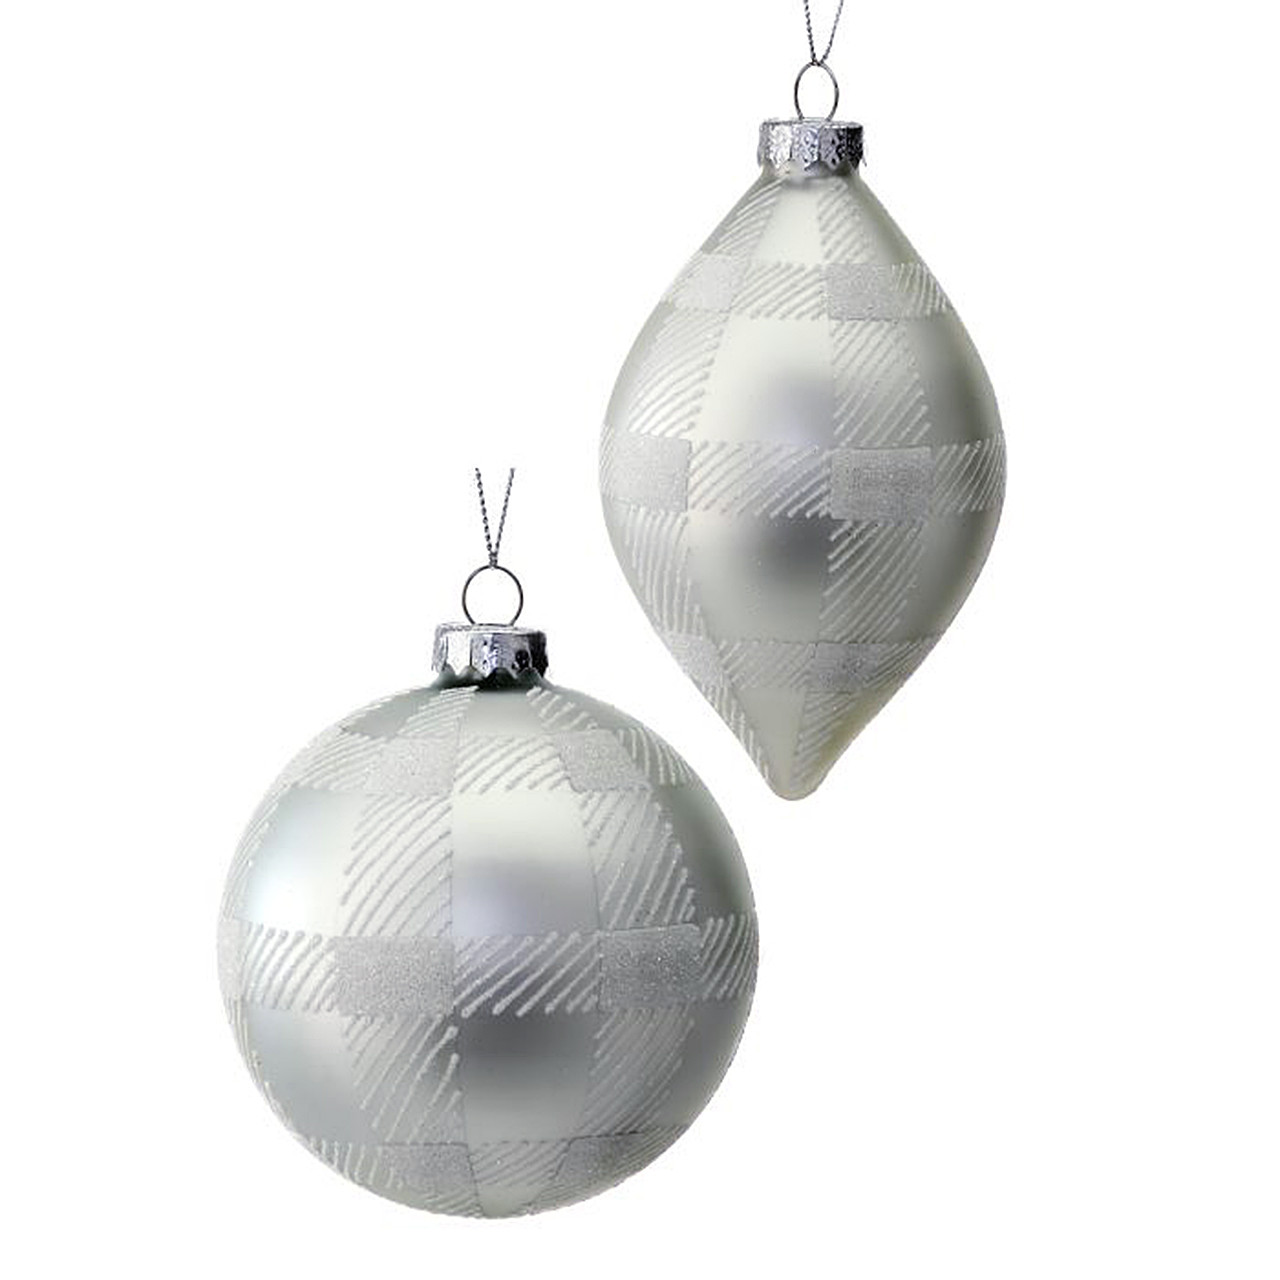 In-Store Only - 4.5 in. Silver Glass Check Ball and Finial Ornaments, Set of 2 